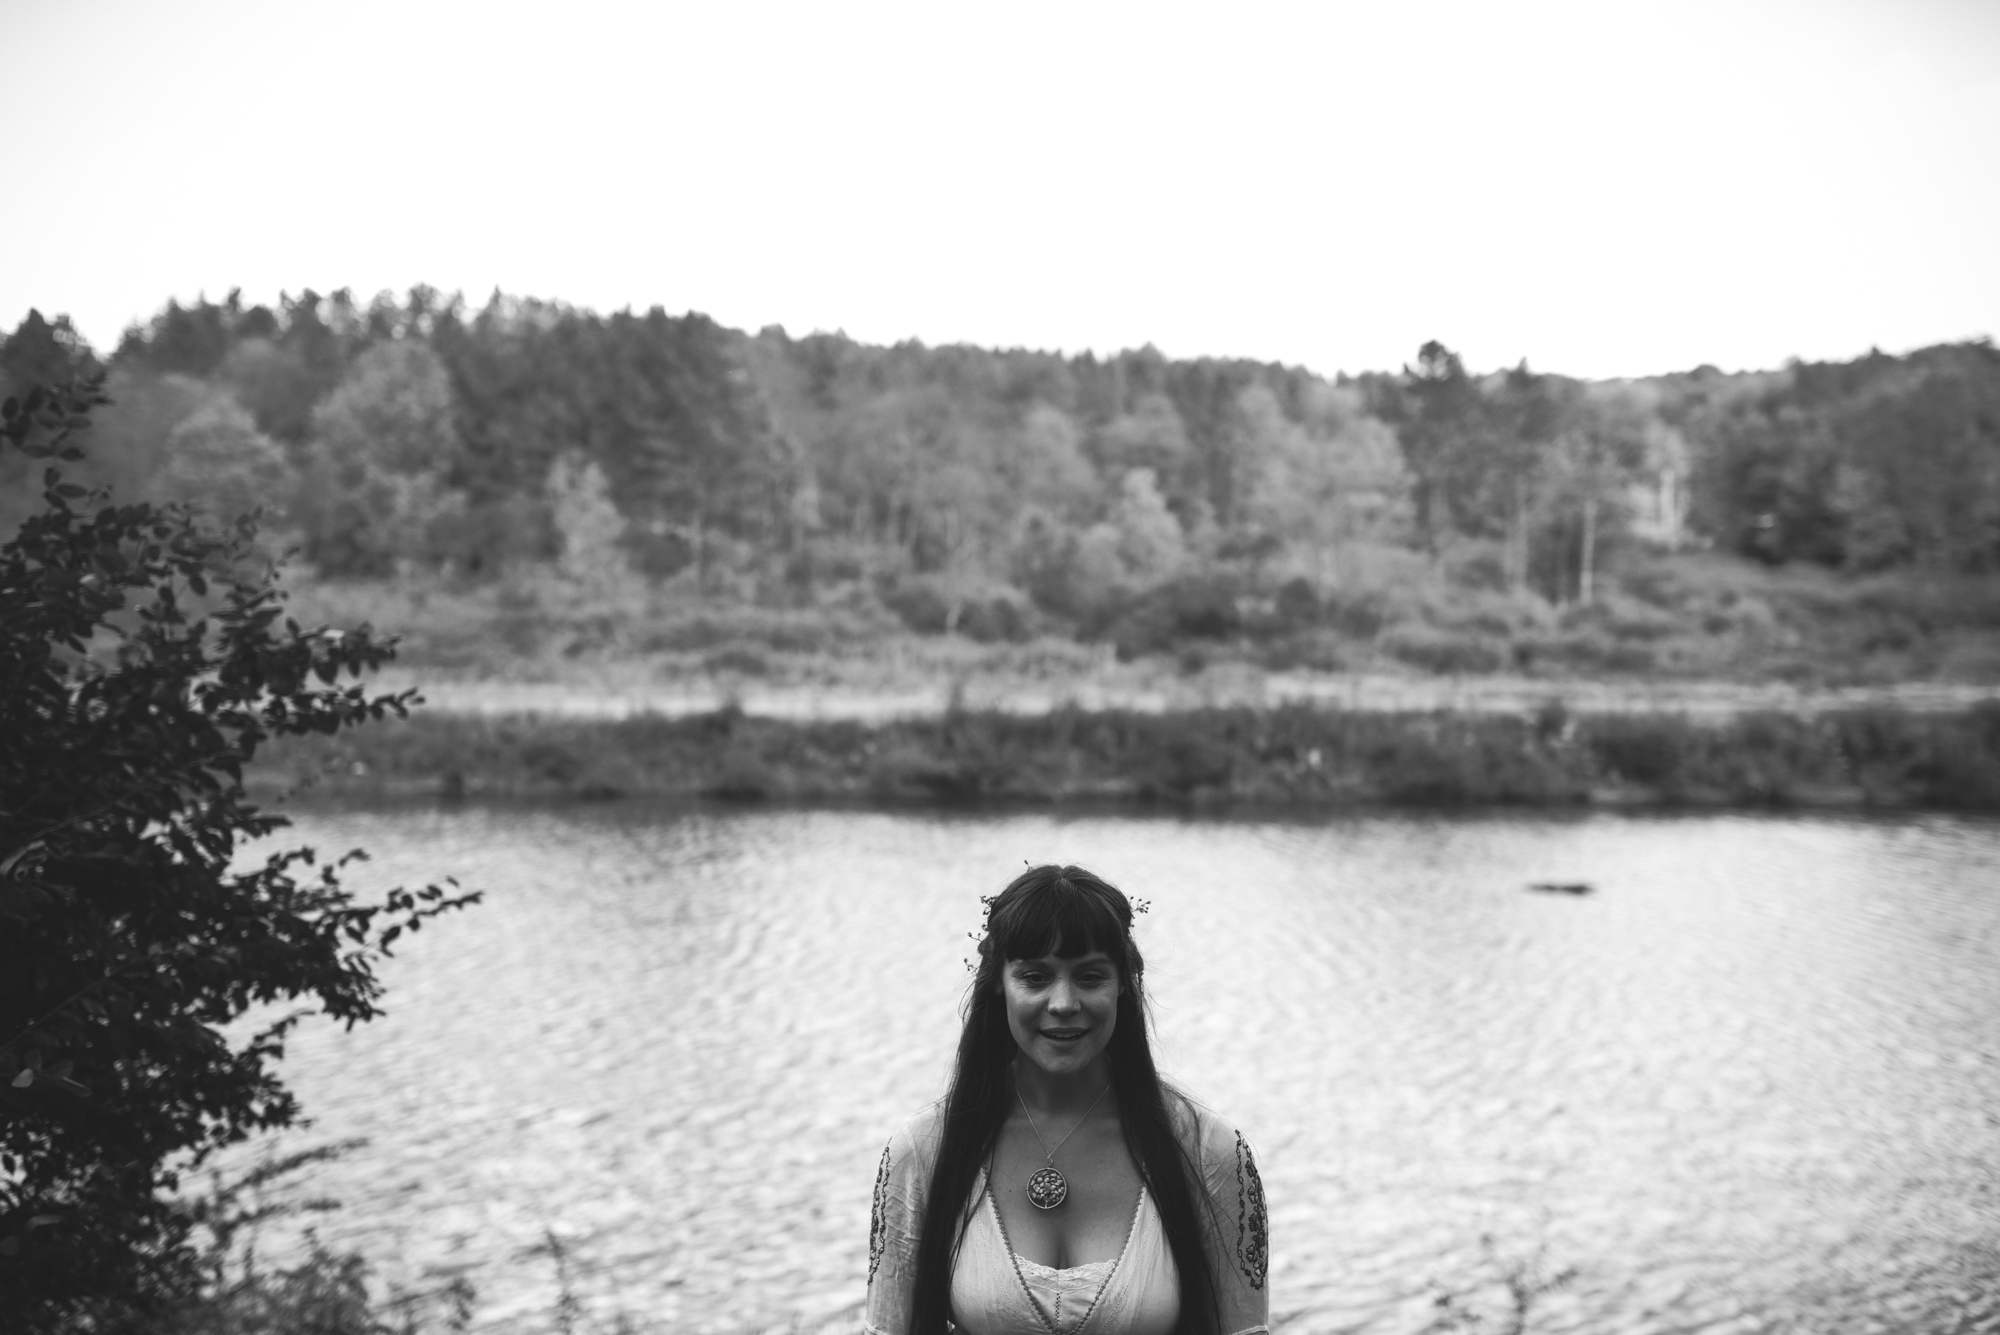  Mountain Wedding, Outdoors, Rustic, West Virginia, Maryland Wedding Photographer, DIY, Casual, black and white photo, bride smiling and posing in front of water, Blackwater River 